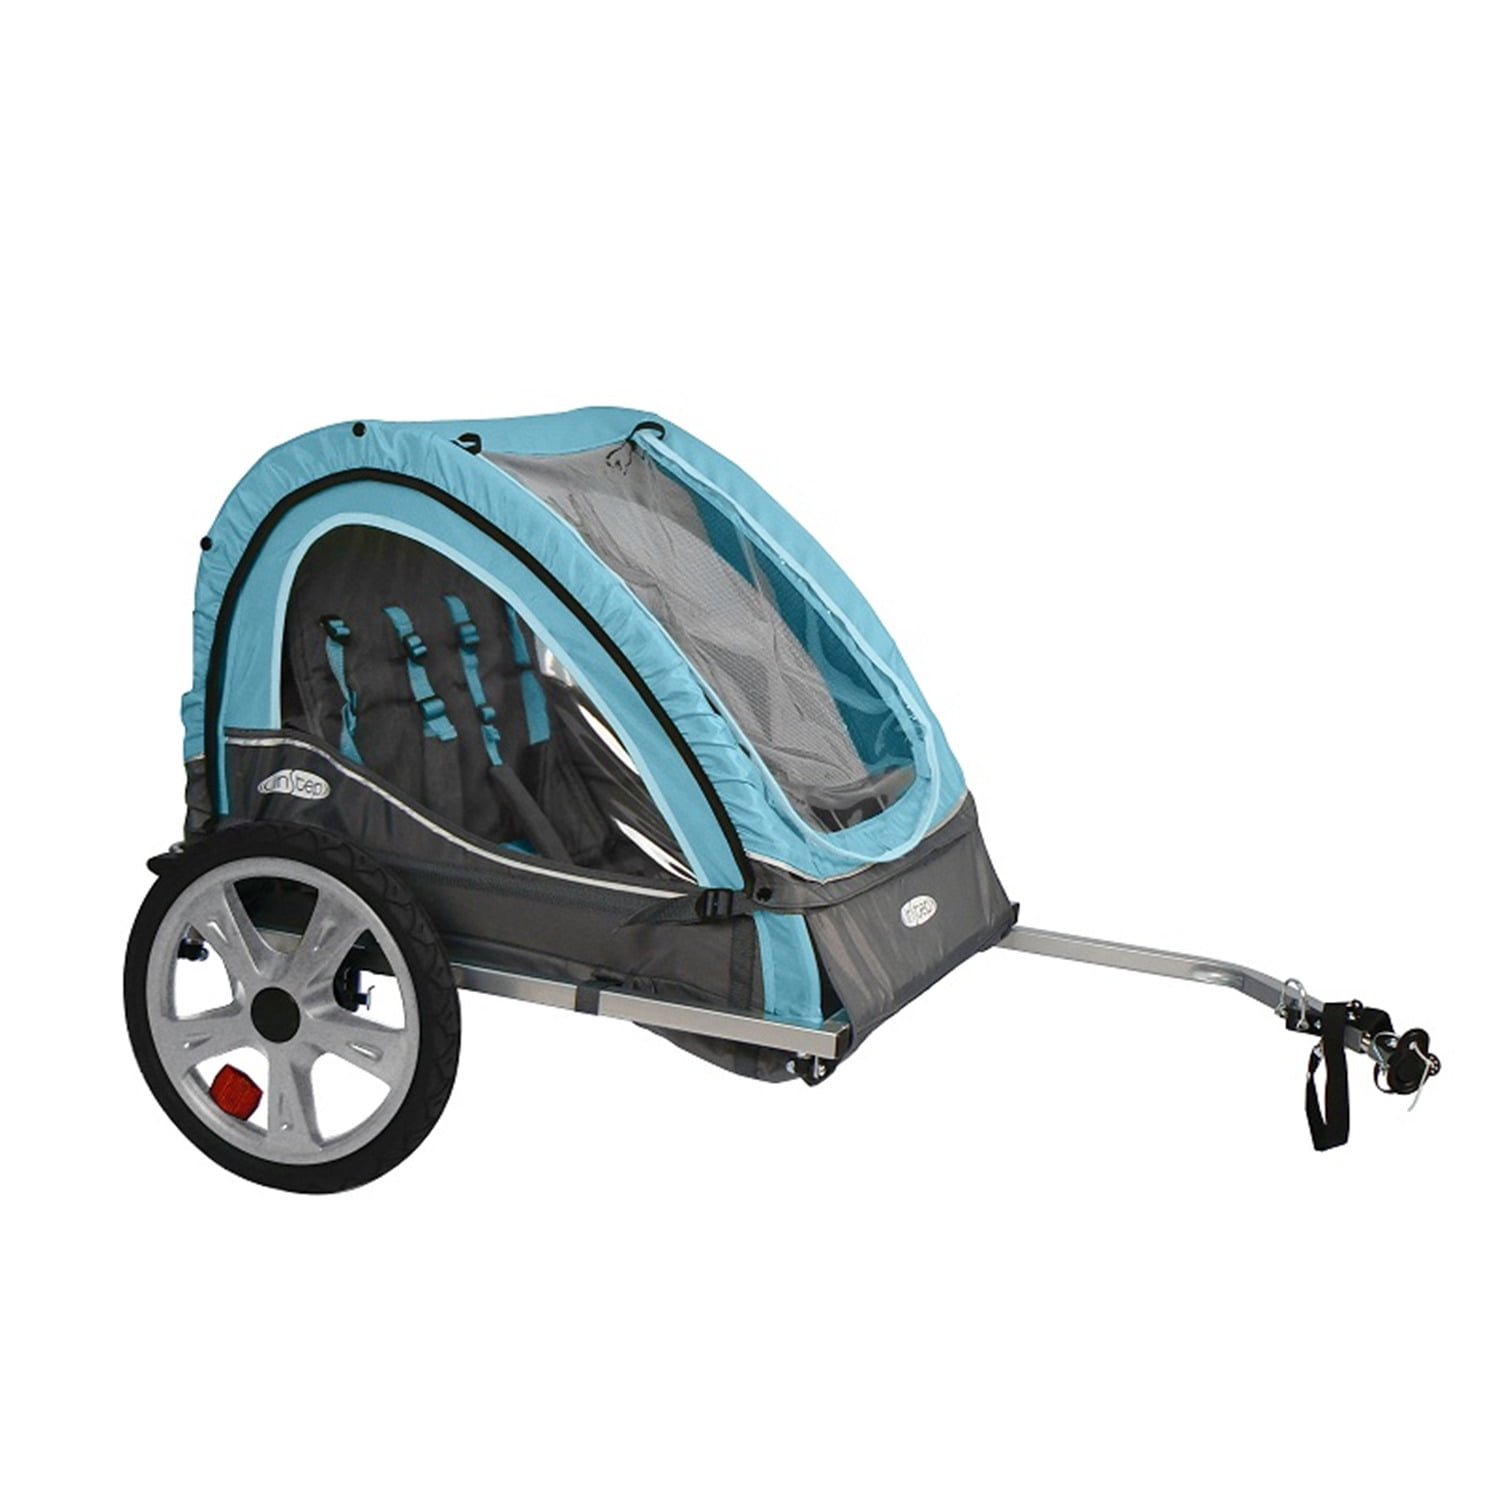 InStep Single Seat and Double Seat Foldable Tow Behind Bike Trailers Multiple Colors Available Featuring 2-in-1 Canopy and 16-Inch Wheels for Kids and Children 